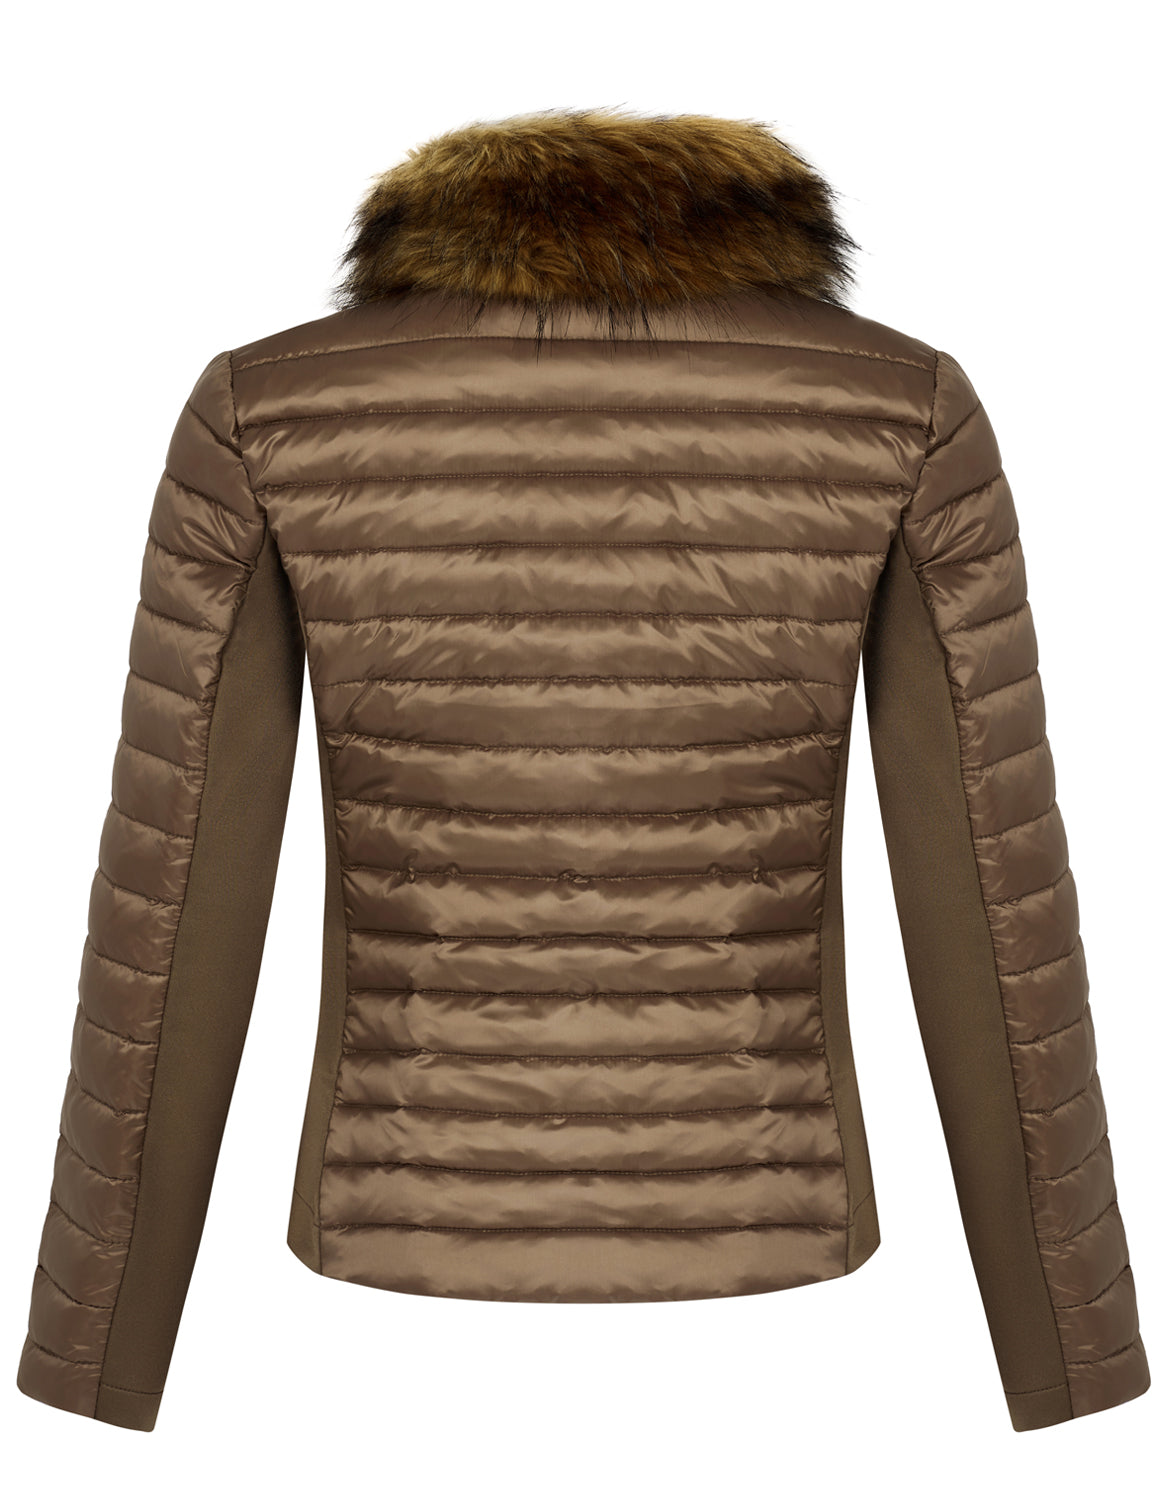 Back view shot of a woman's puffer jacket in bronze, khaki colour. It has stretch sides, a gold zip and a detachable faux fur collar.